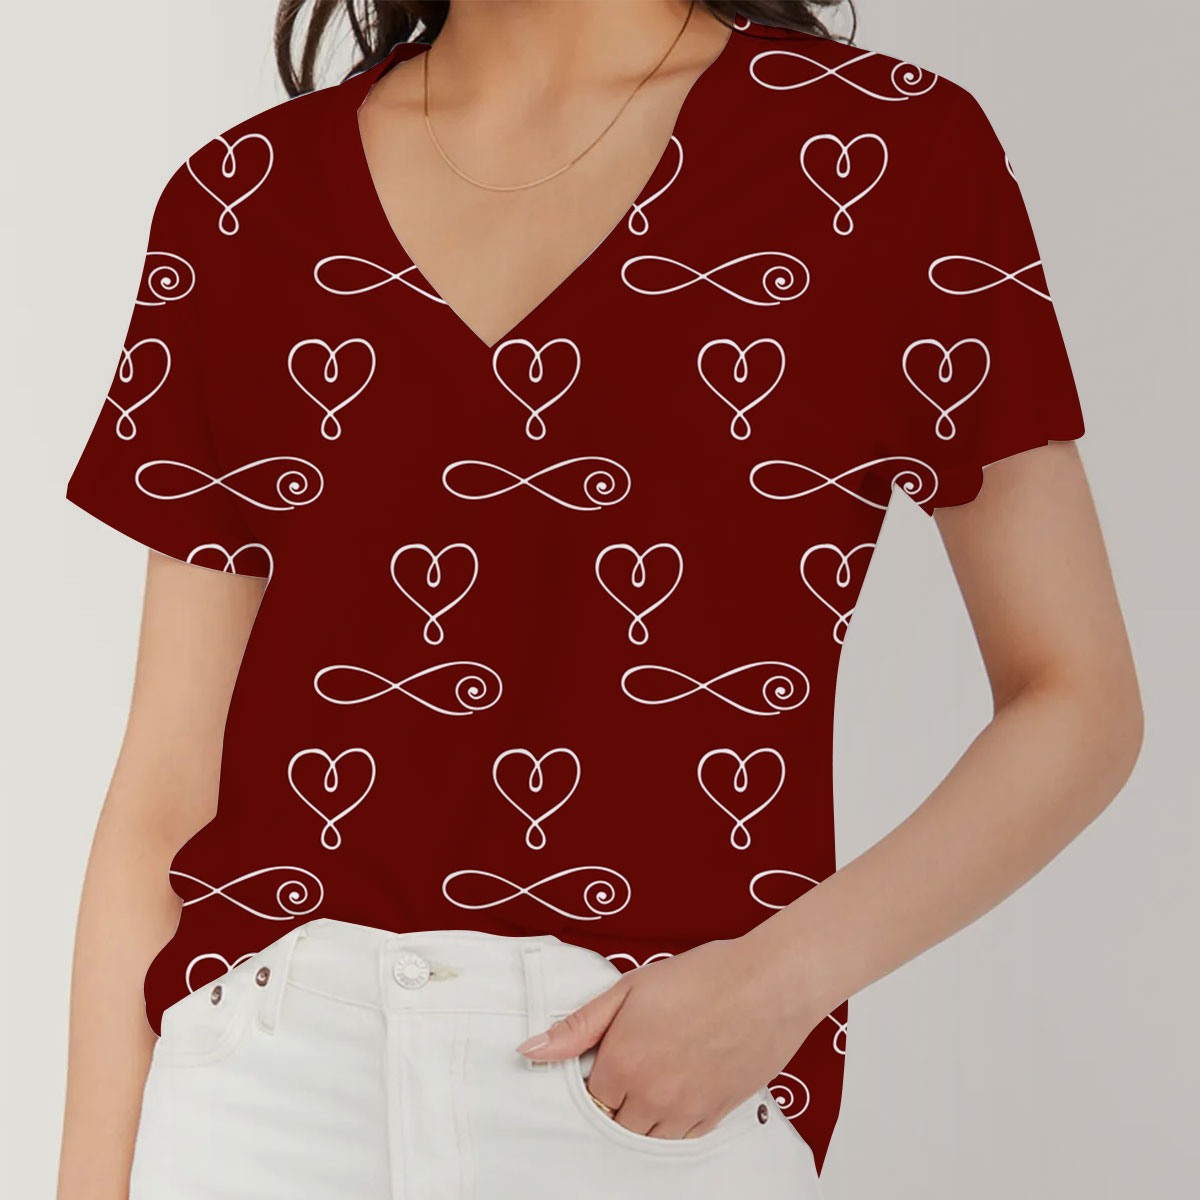 Bohemian With Hearts And Signs Of Infinity V-Neck Women's T-Shirt